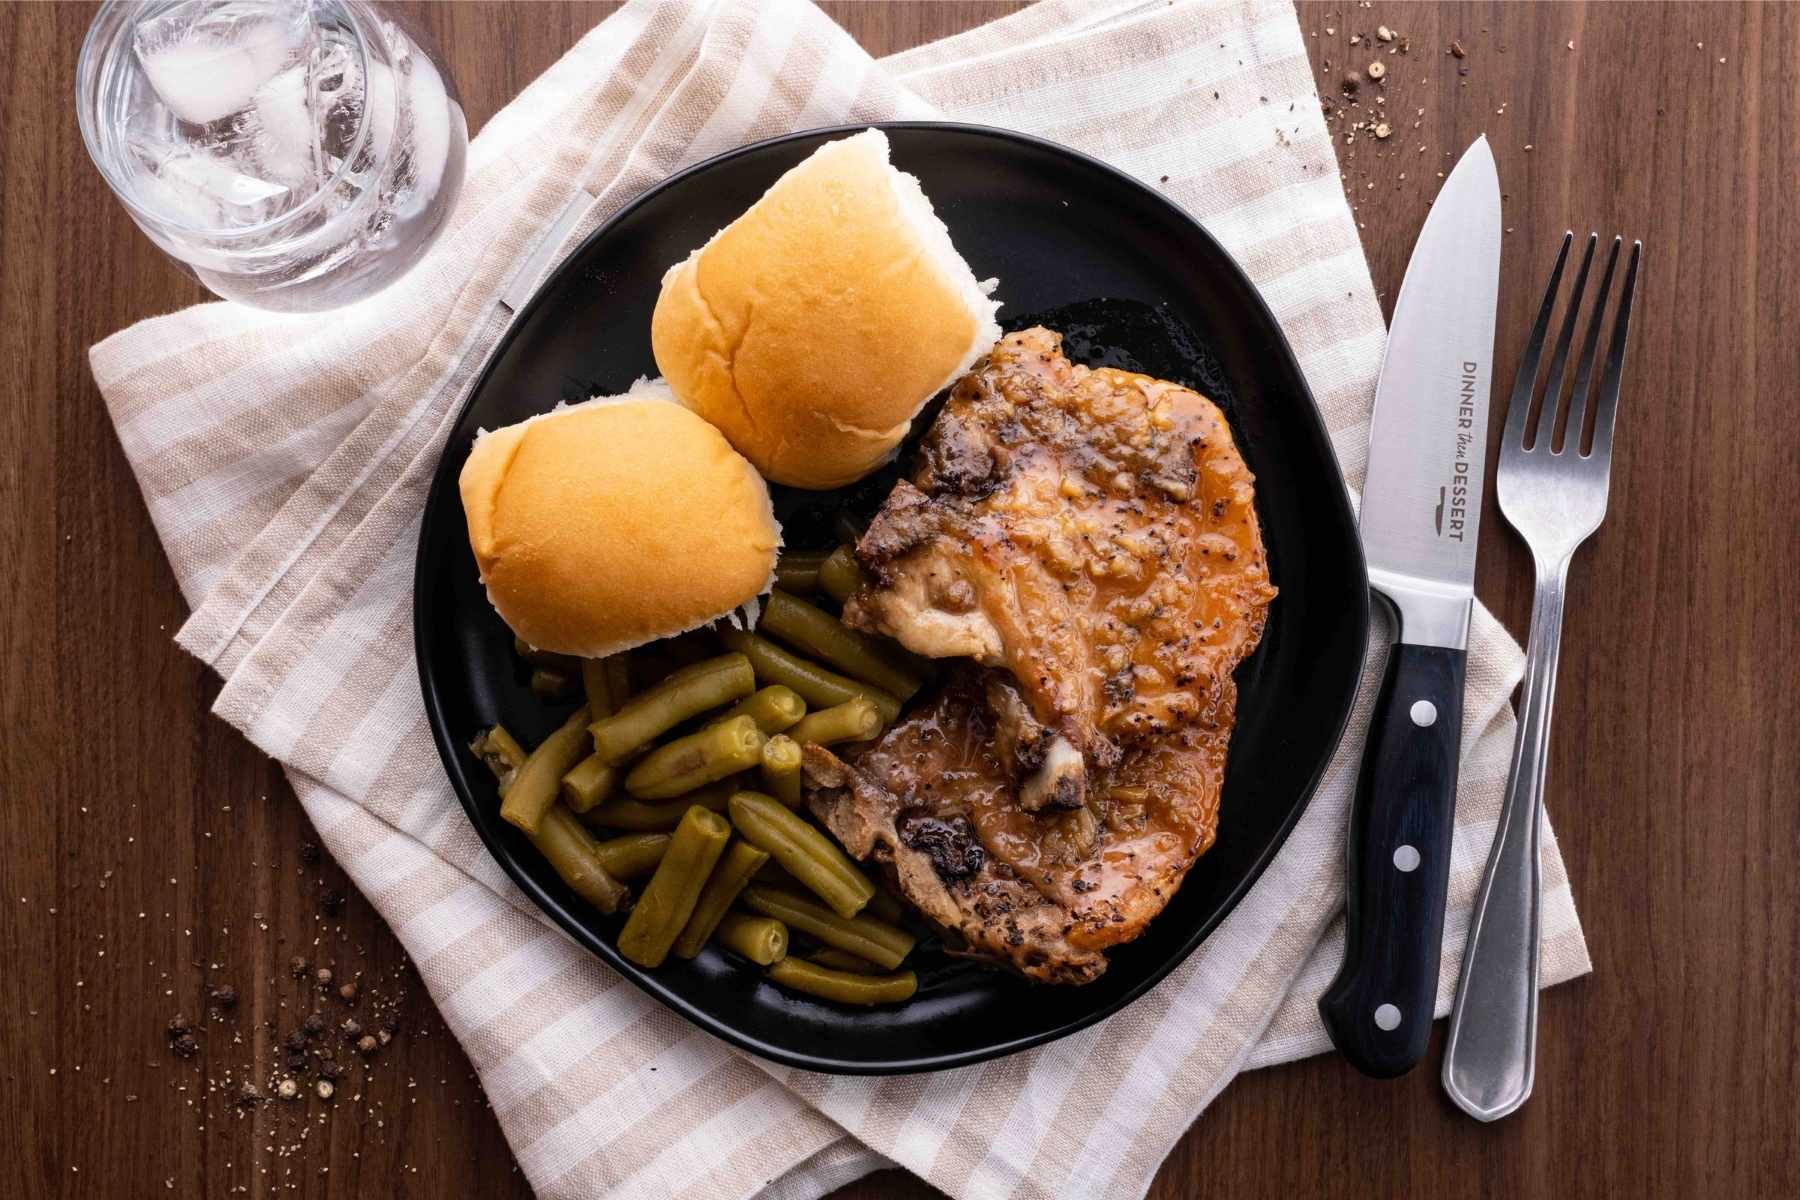 Slow Cooker Brown Sugar Garlic Pork Chops on plate with green beans and dinner rolls